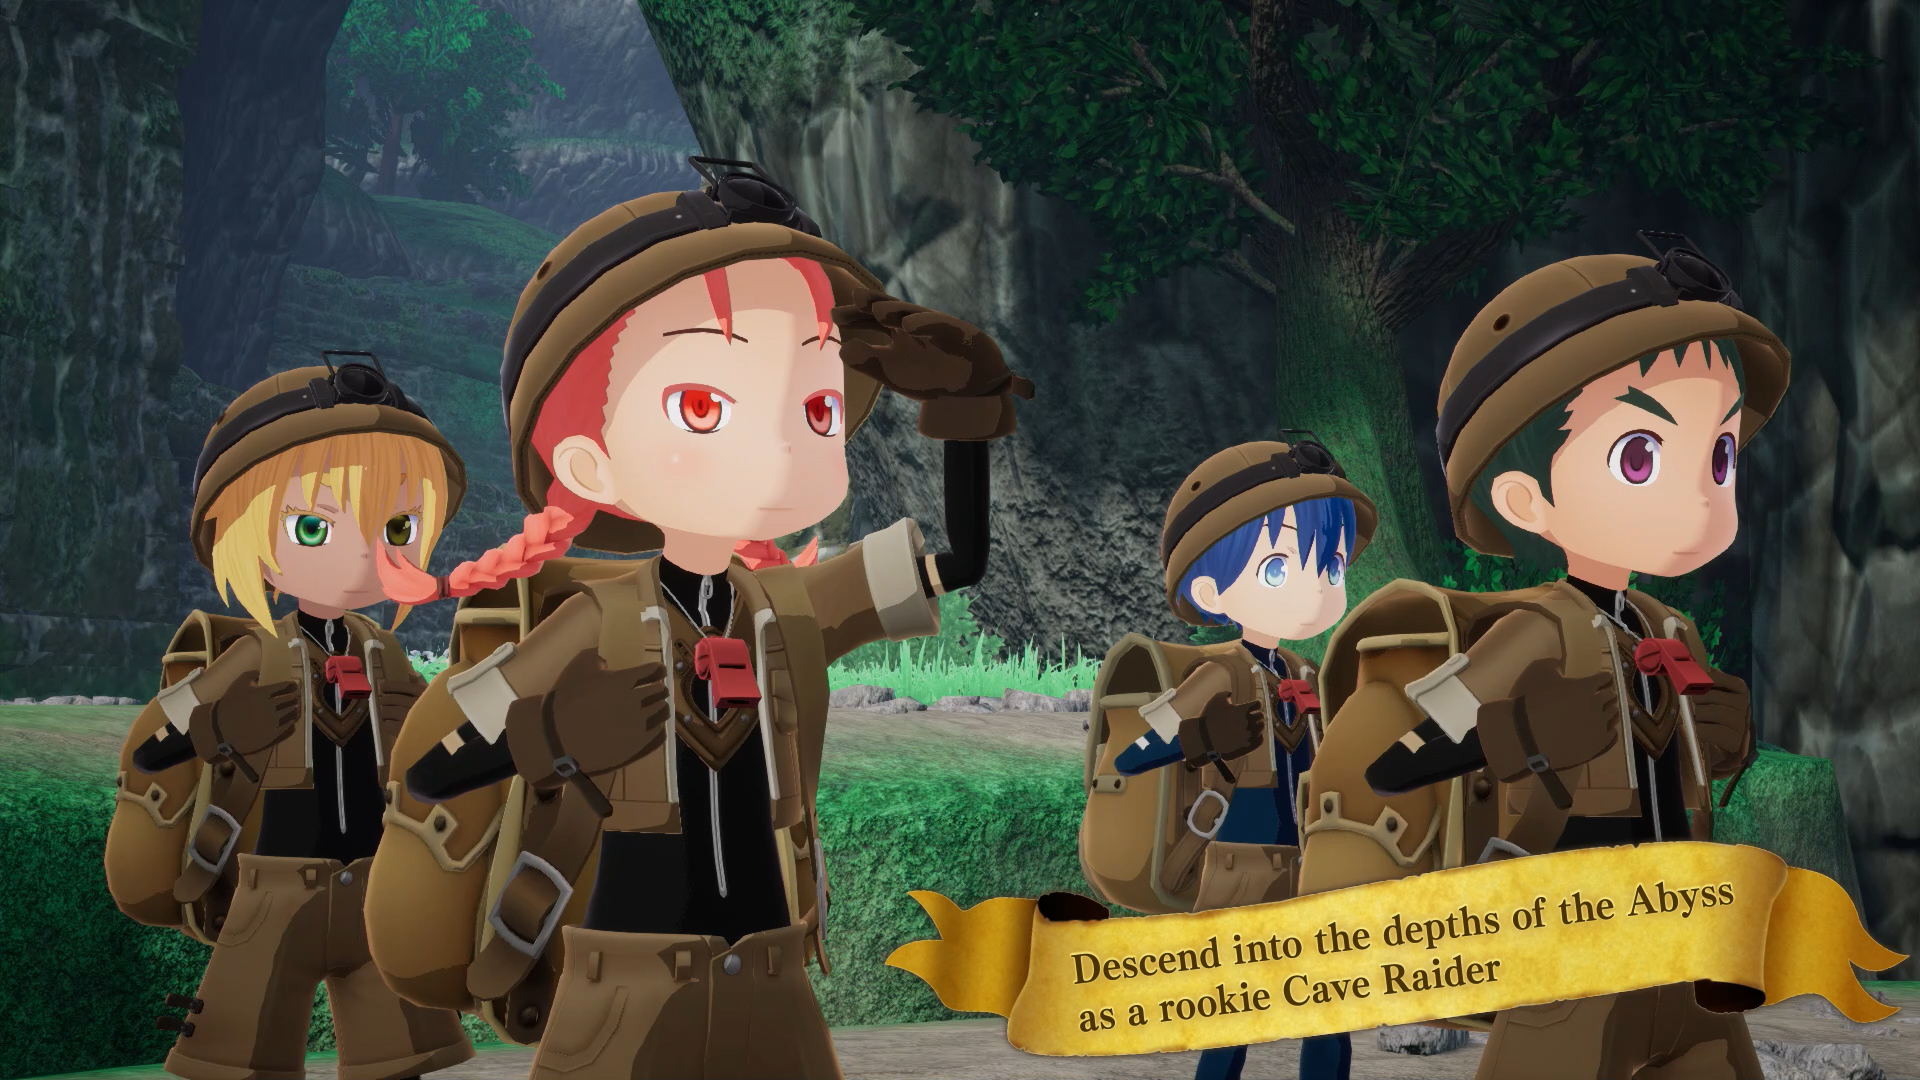 Made in Abyss: Binary Star Falling into Darkness launches this fall, debut  trailer - Gematsu